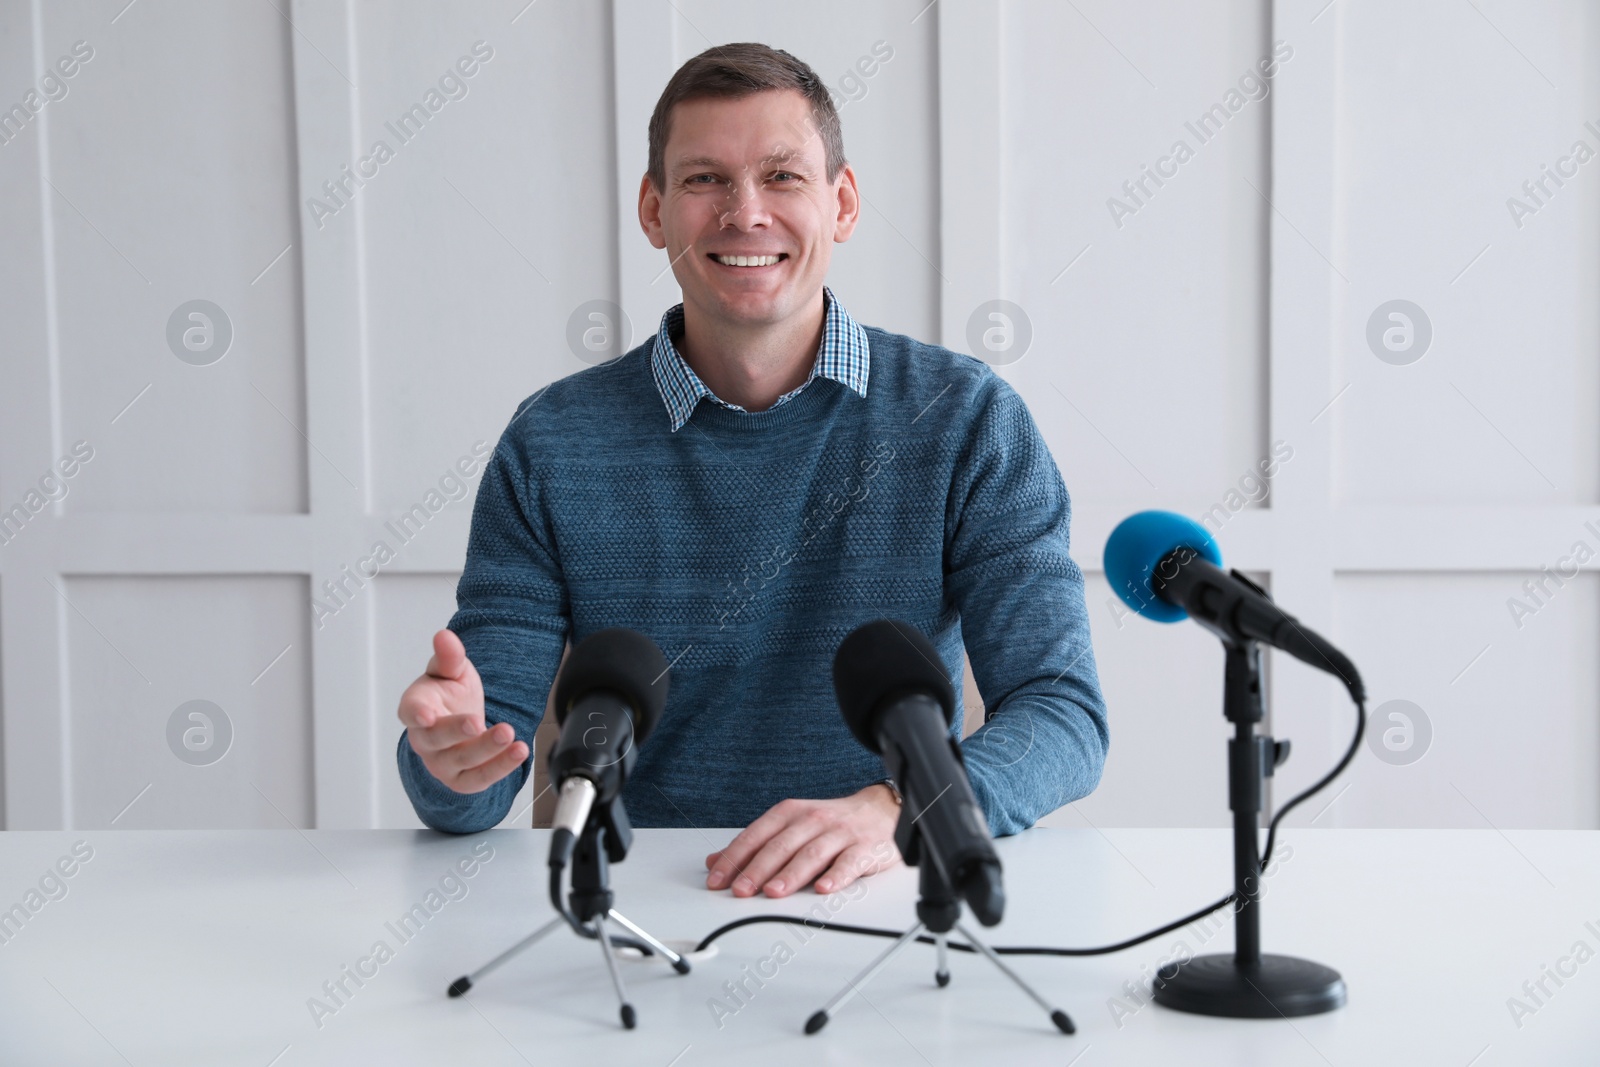 Photo of Business man giving interview at official event